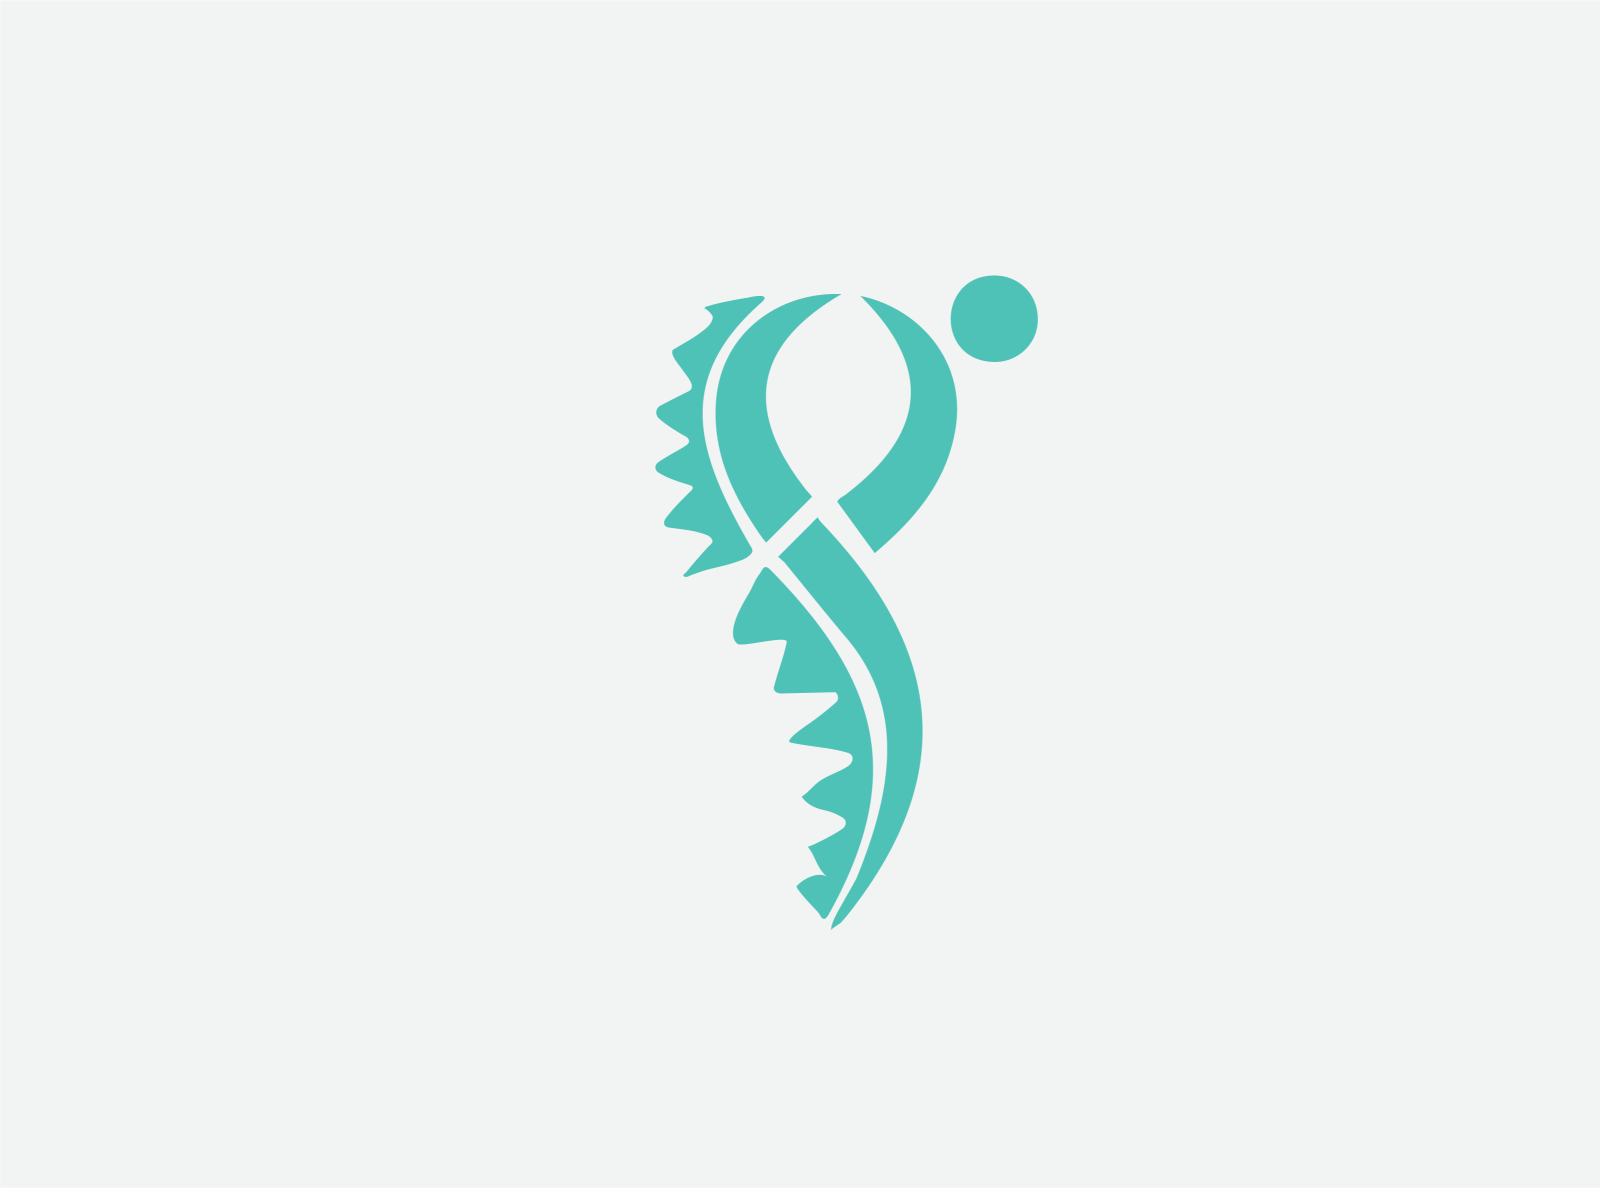 physiotherapy logo design